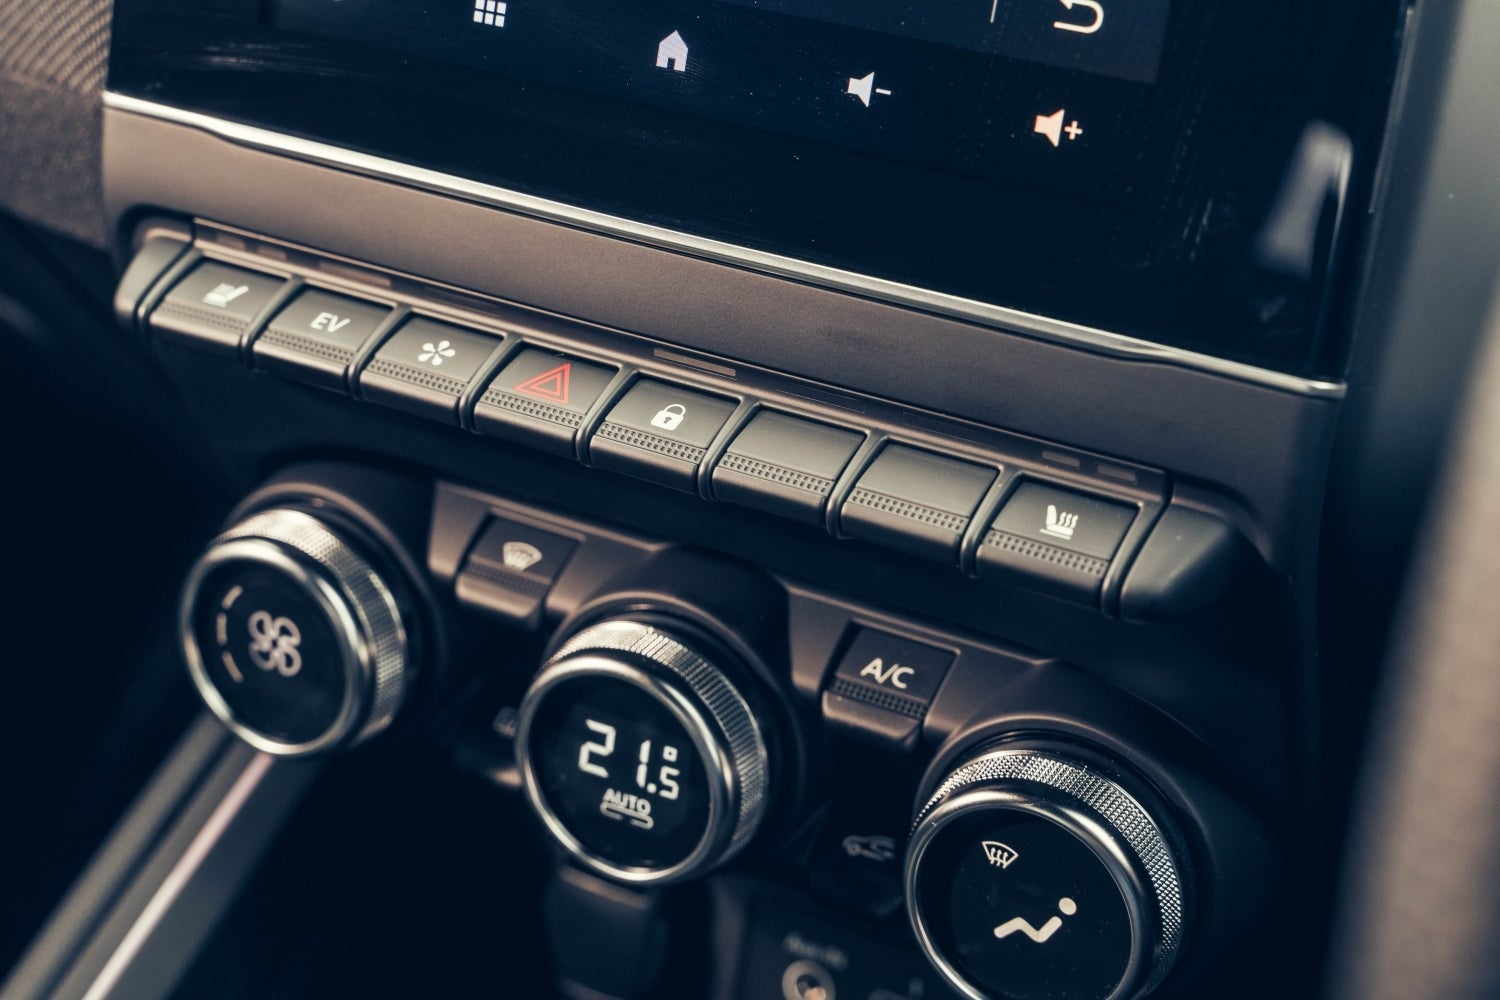 Another welcome bit of old-school thinking from Renault – decent fat rotary dial controls